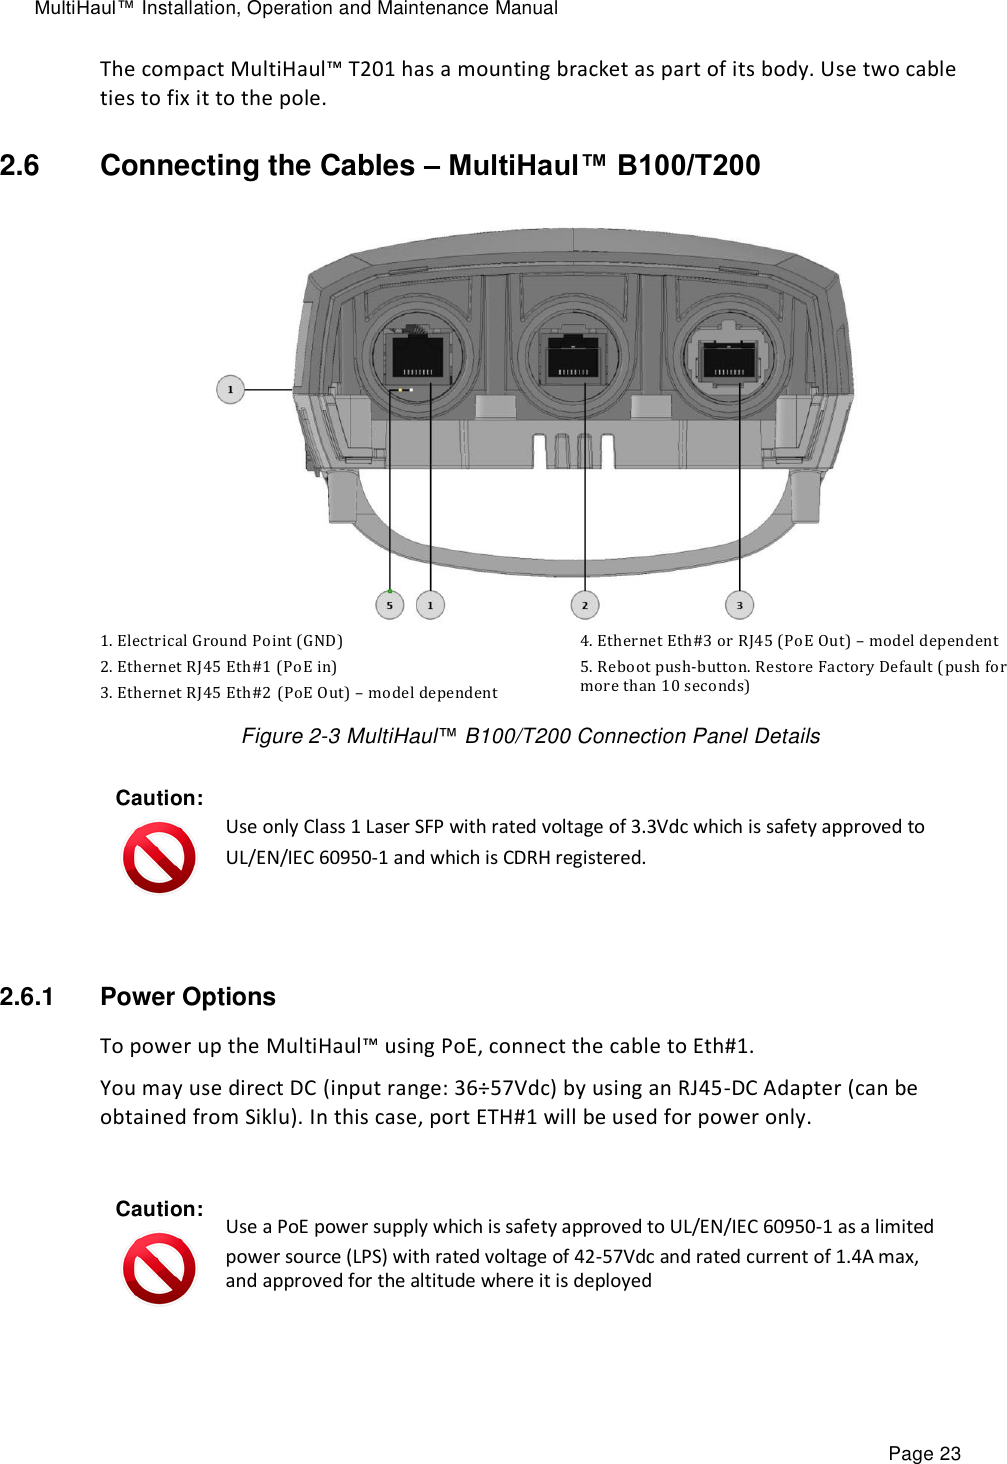 MultiHaul™ Installation, Operation and Maintenance Manual Page 23 The compact MultiHaul™ T201 has a mounting bracket as part of its body. Use two cable ties to fix it to the pole. 2.6  Connecting the Cables – MultiHaul™ B100/T200  1. Electrical Ground Point (GND) 2. Ethernet RJ45 Eth#1 (PoE in) 3. Ethernet RJ45 Eth#2 (PoE Out) – model dependent  4. Ethernet Eth#3 or RJ45 (PoE Out) – model dependent 5. Reboot push-button. Restore Factory Default (push for more than 10 seconds) Figure 2-3 MultiHaul™ B100/T200 Connection Panel Details Caution:  Use only Class 1 Laser SFP with rated voltage of 3.3Vdc which is safety approved to  UL/EN/IEC 60950-1 and which is CDRH registered.  2.6.1  Power Options To power up the MultiHaul™ using PoE, connect the cable to Eth#1.  You may use direct DC (input range: 36÷57Vdc) by using an RJ45-DC Adapter (can be obtained from Siklu). In this case, port ETH#1 will be used for power only.  Caution:  Use a PoE power supply which is safety approved to UL/EN/IEC 60950-1 as a limited  power source (LPS) with rated voltage of 42-57Vdc and rated current of 1.4A max, and approved for the altitude where it is deployed  